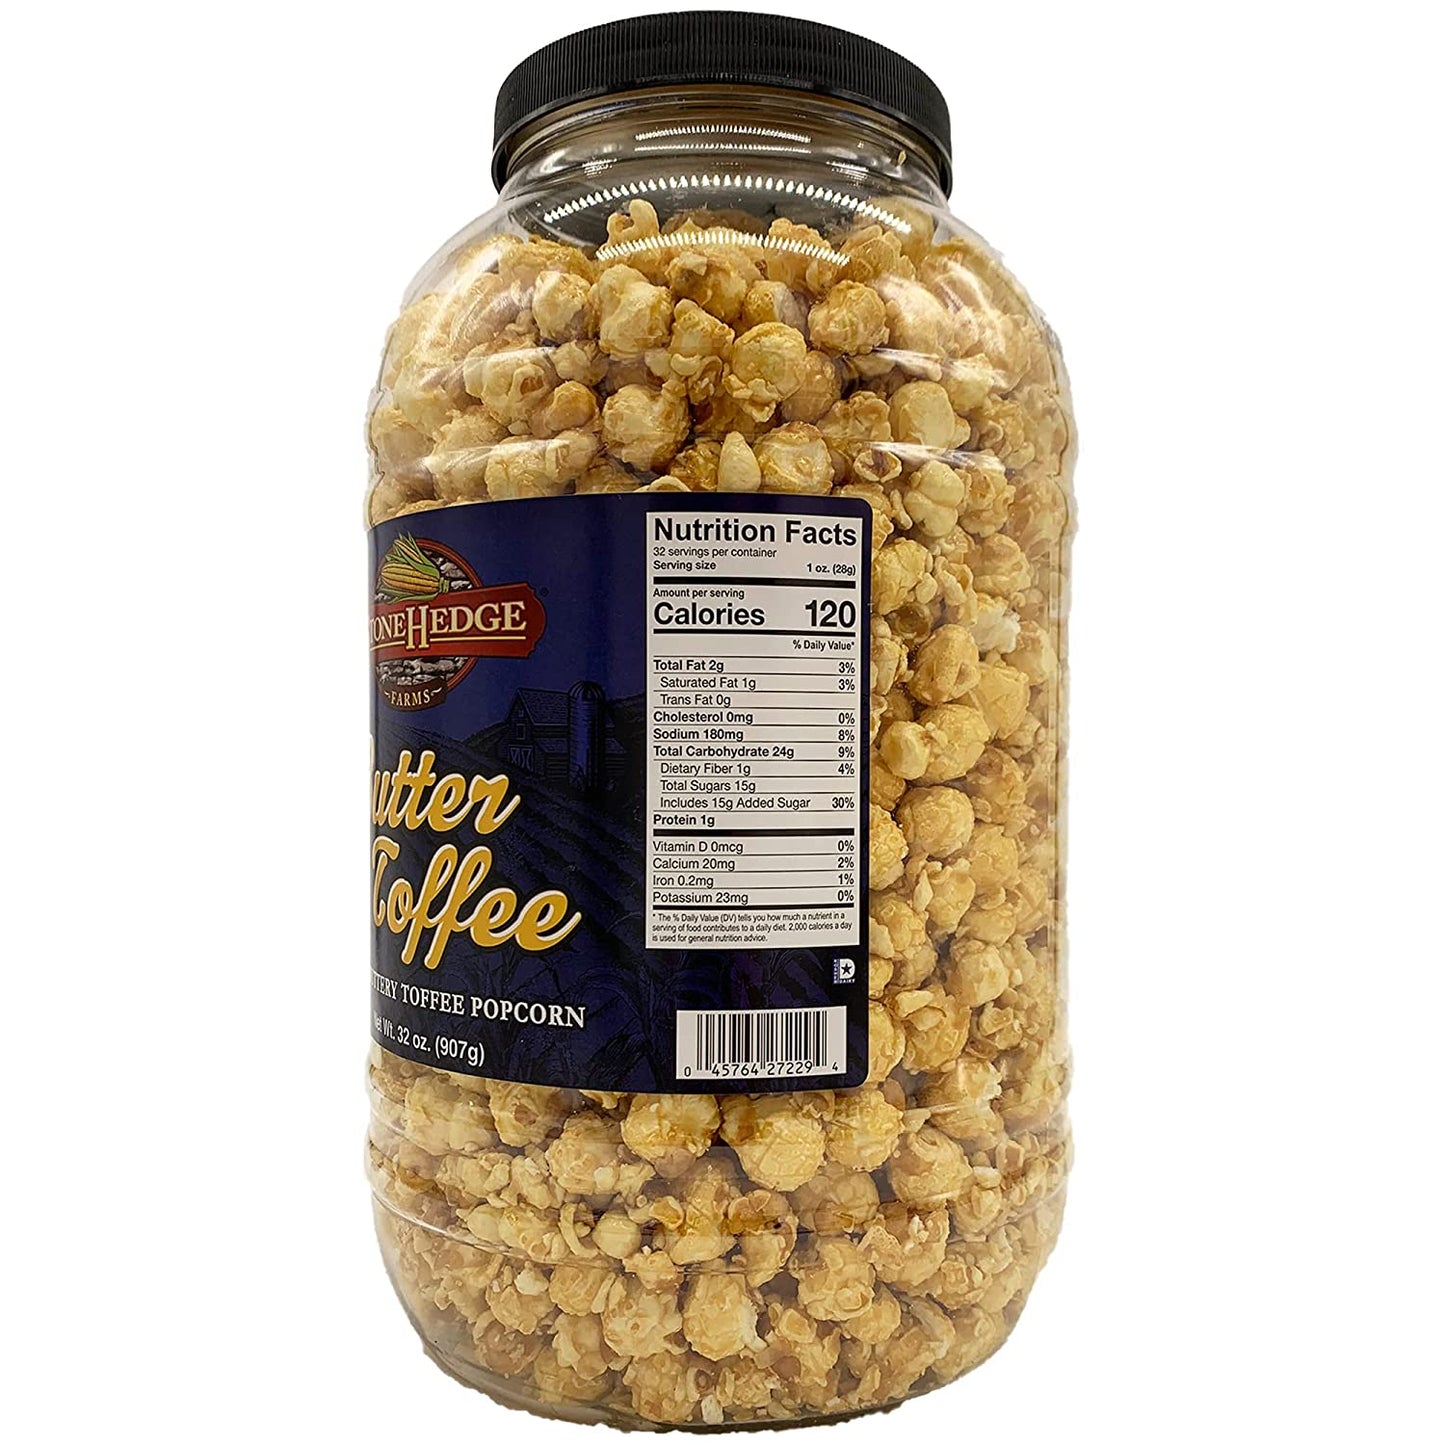 StoneHedge Farms Gourmet Butter Toffee Popcorn - Deliciously Old Fashioned 32 Oz. Tall Tub! - Made in the USA!